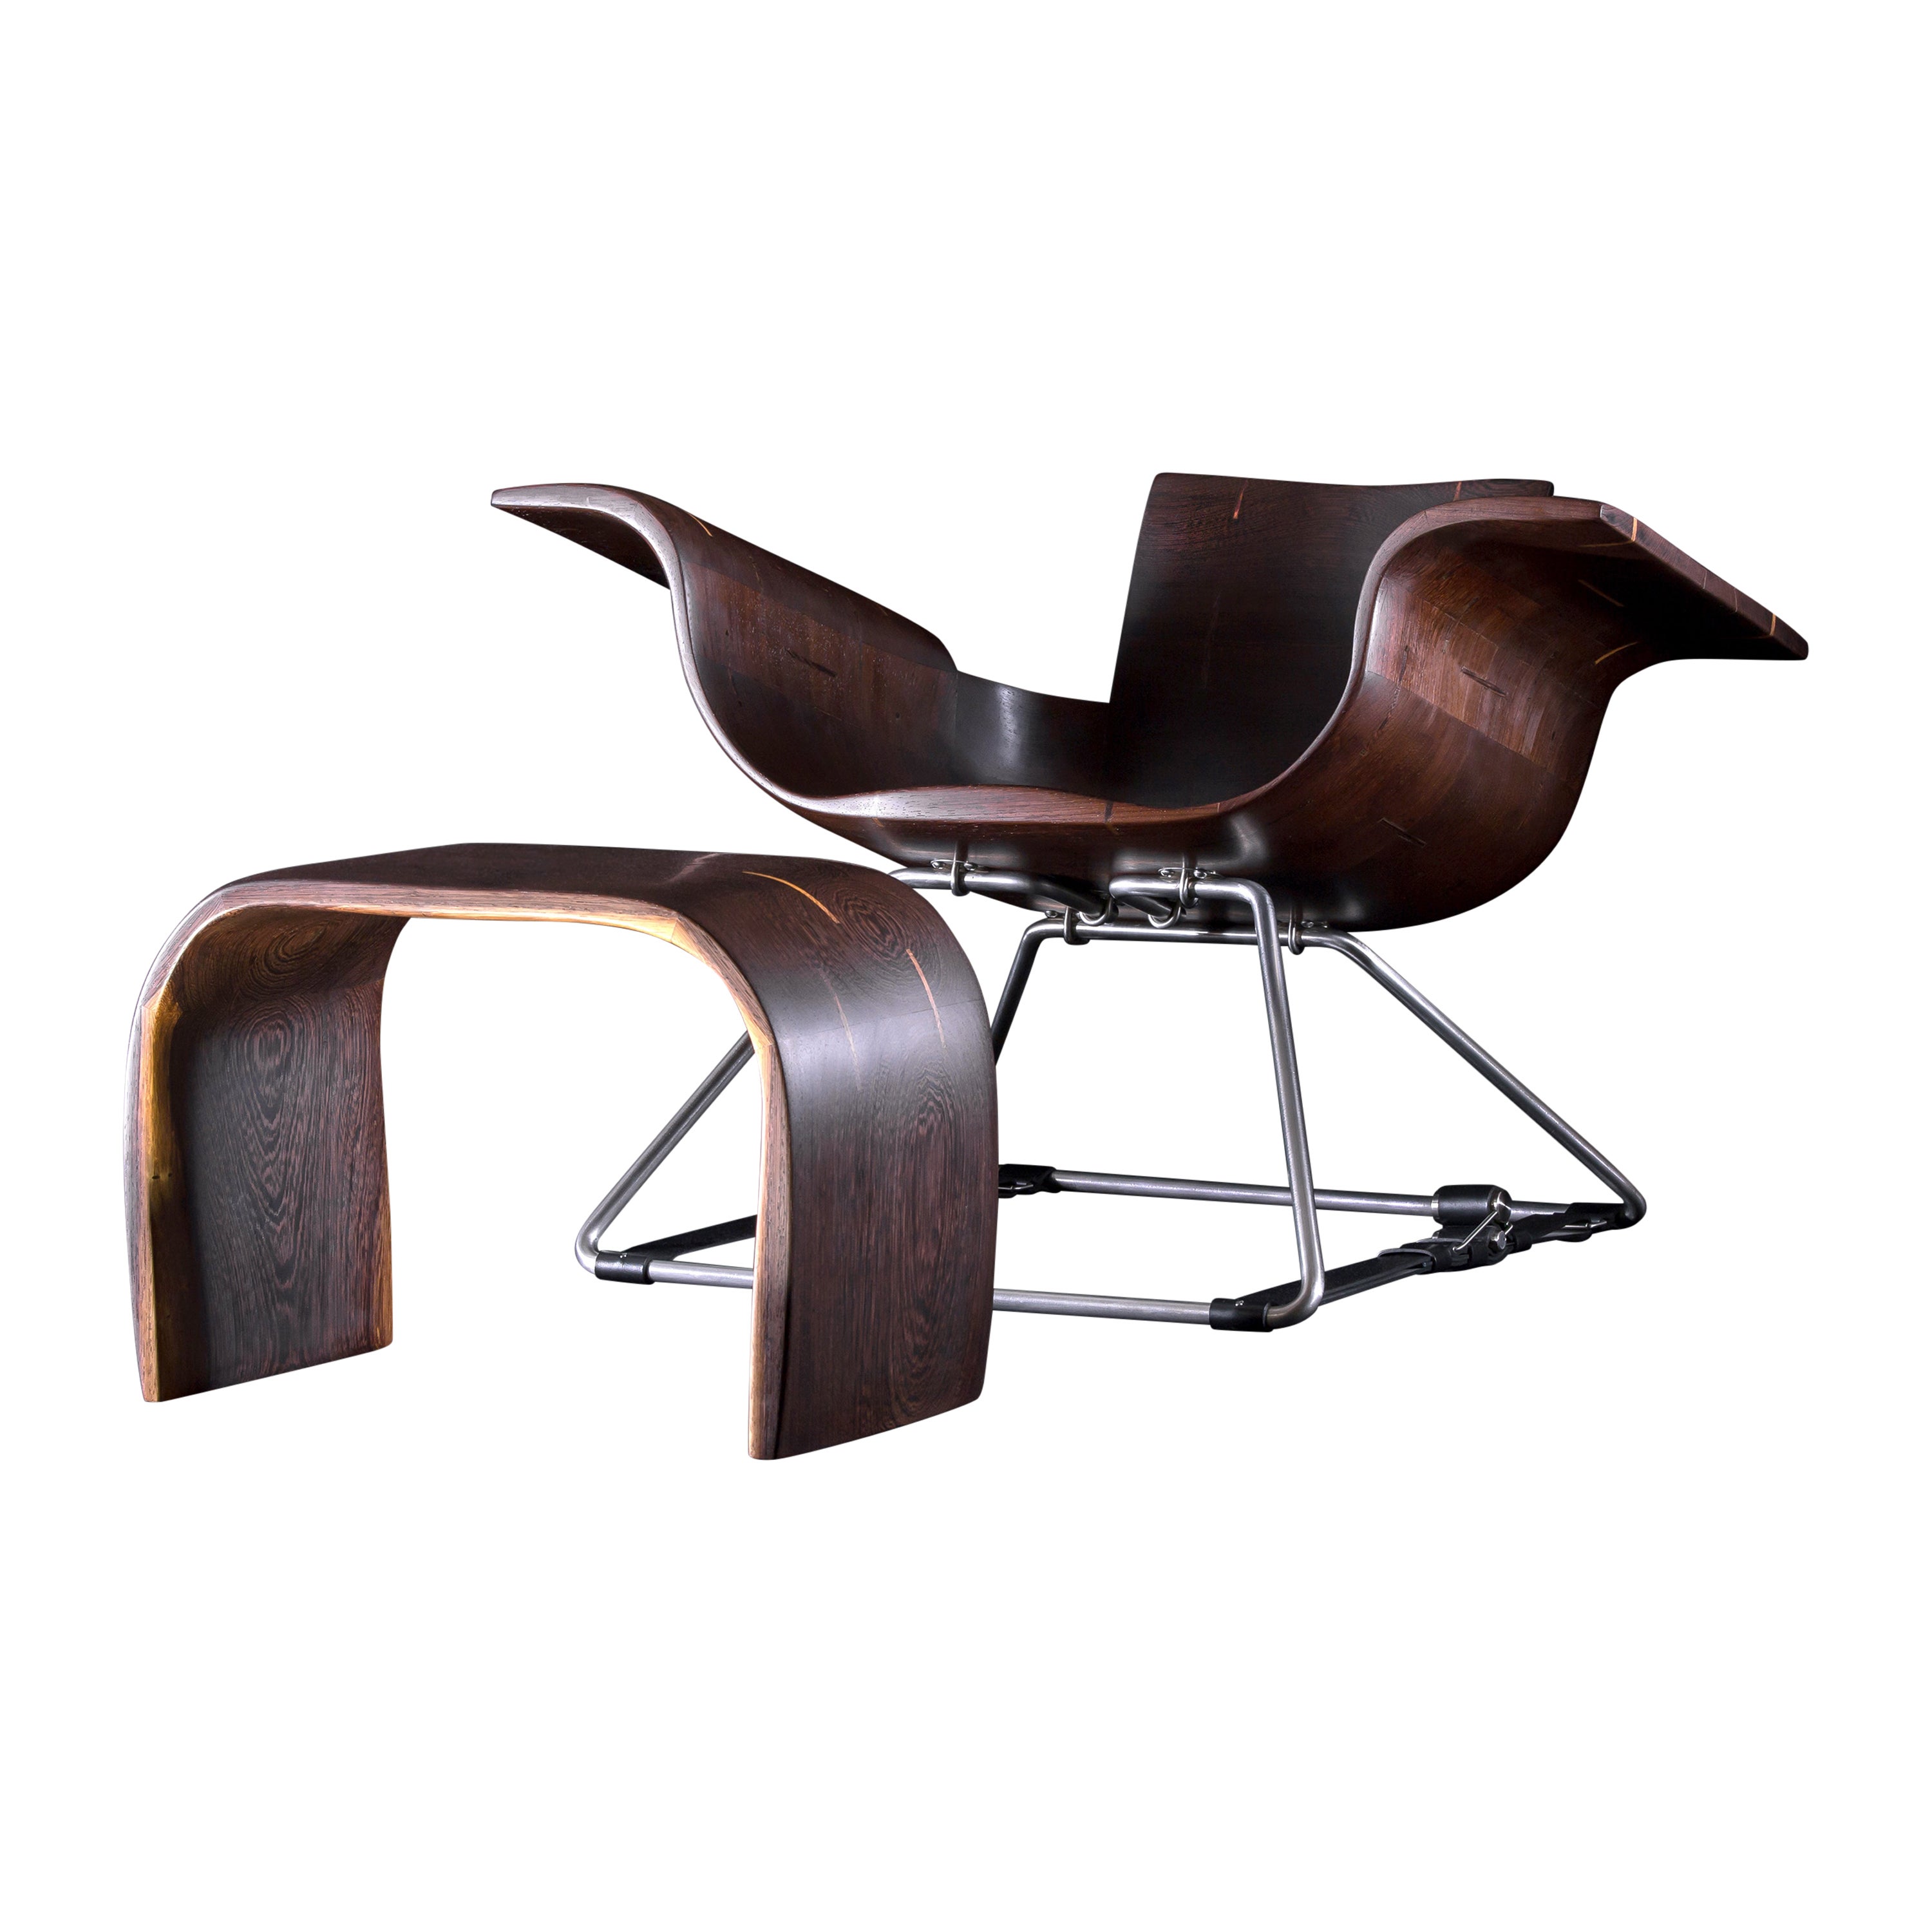 Roadster Armchair with Footstool made out of Wenge Wood. Handcrafted in Poland. For Sale